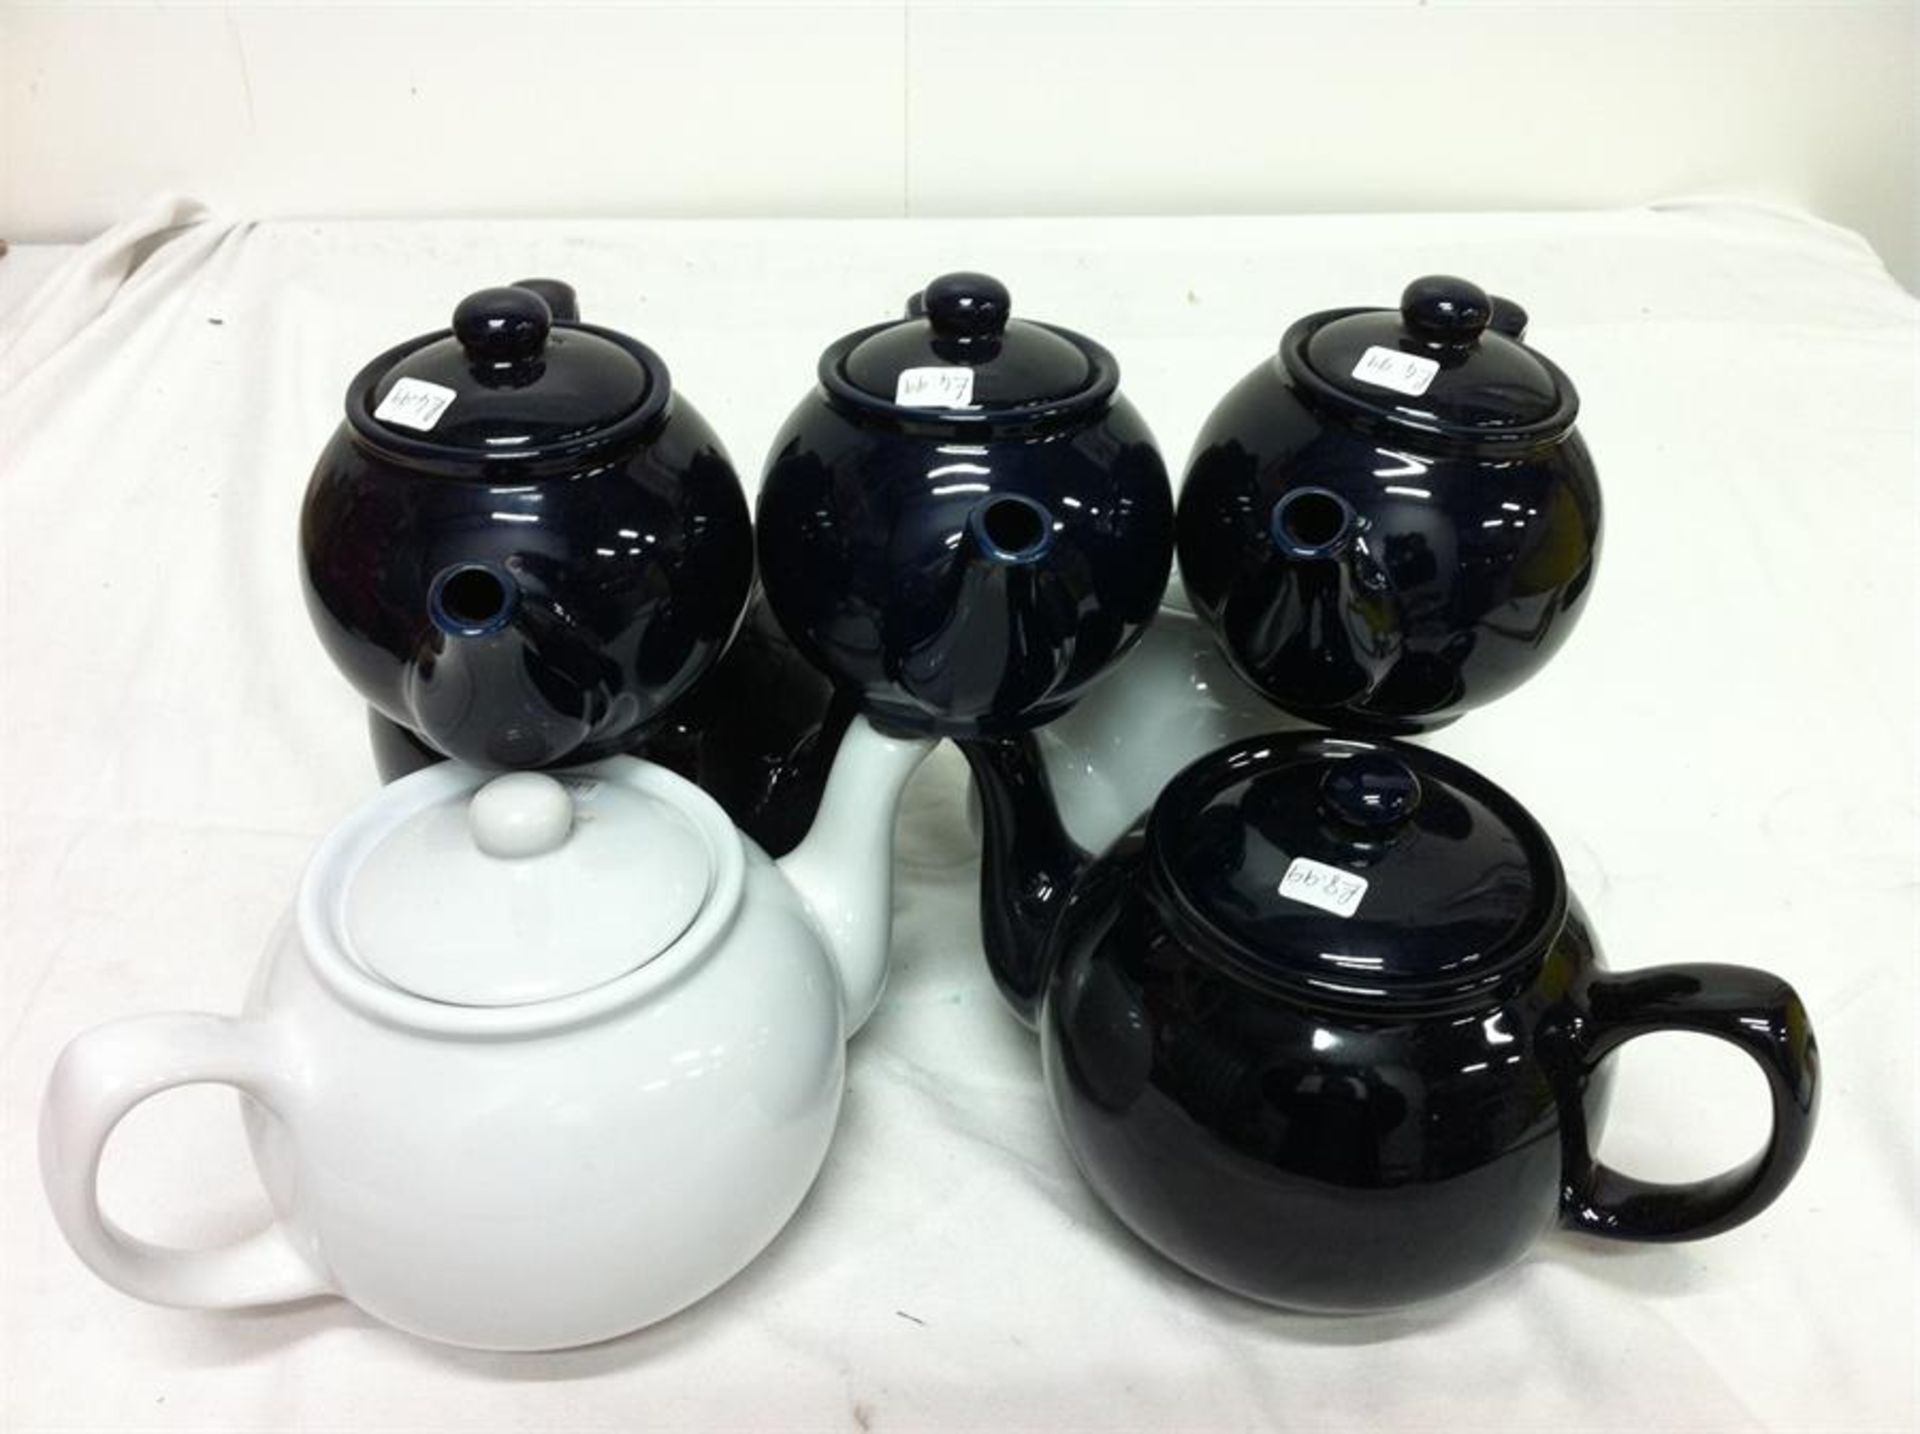 20 small and 6 large ceramic teapots, 3 blue enamel coated coffee pots, 3 white ceramic jugs - Image 5 of 6